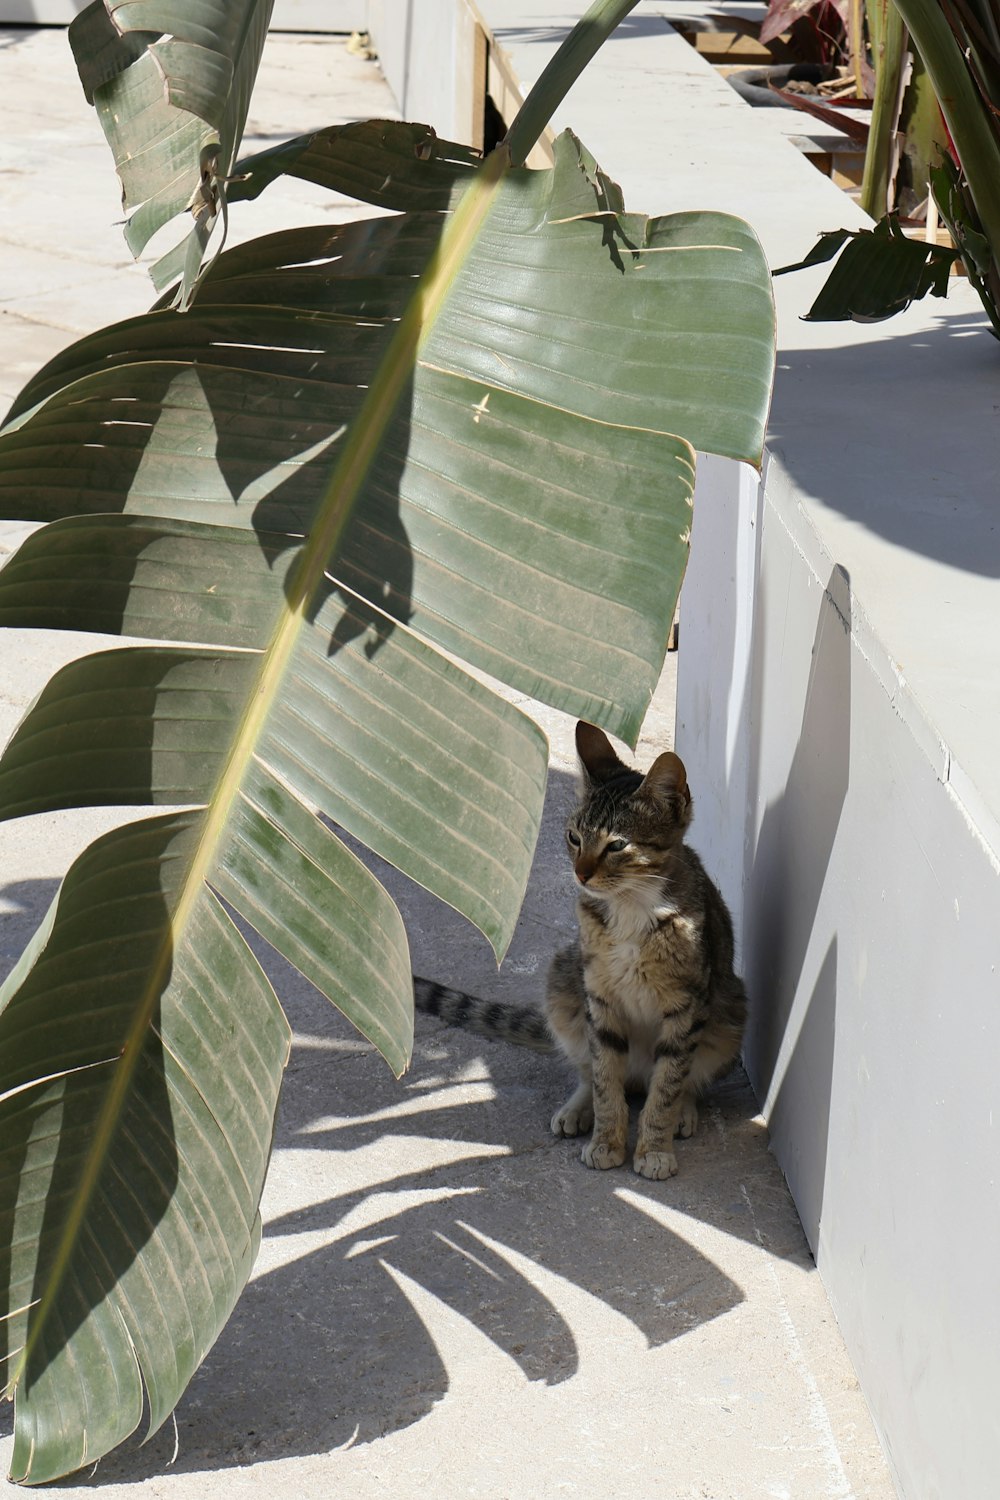 a cat sitting on the ground next to a plant